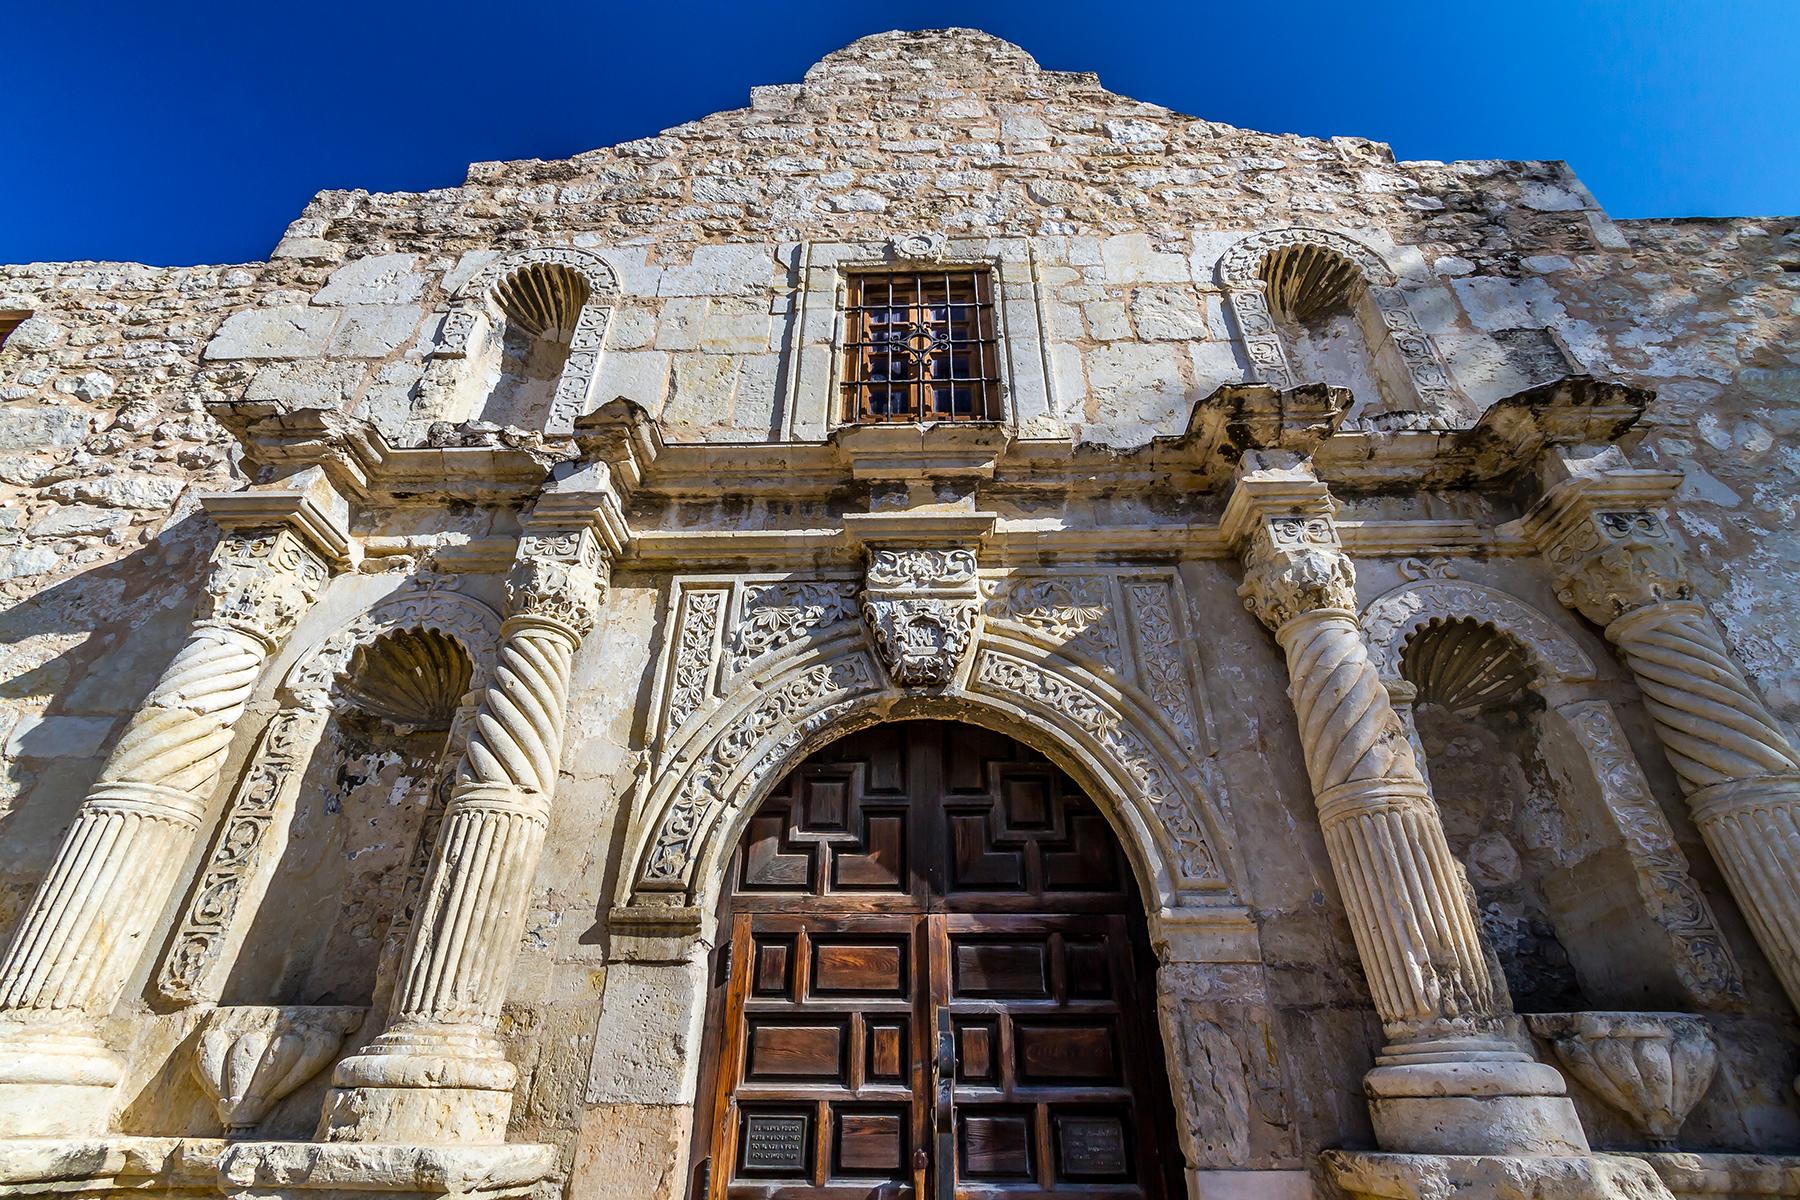 Things You Need to Know Before Visiting the Alamo Mission in San